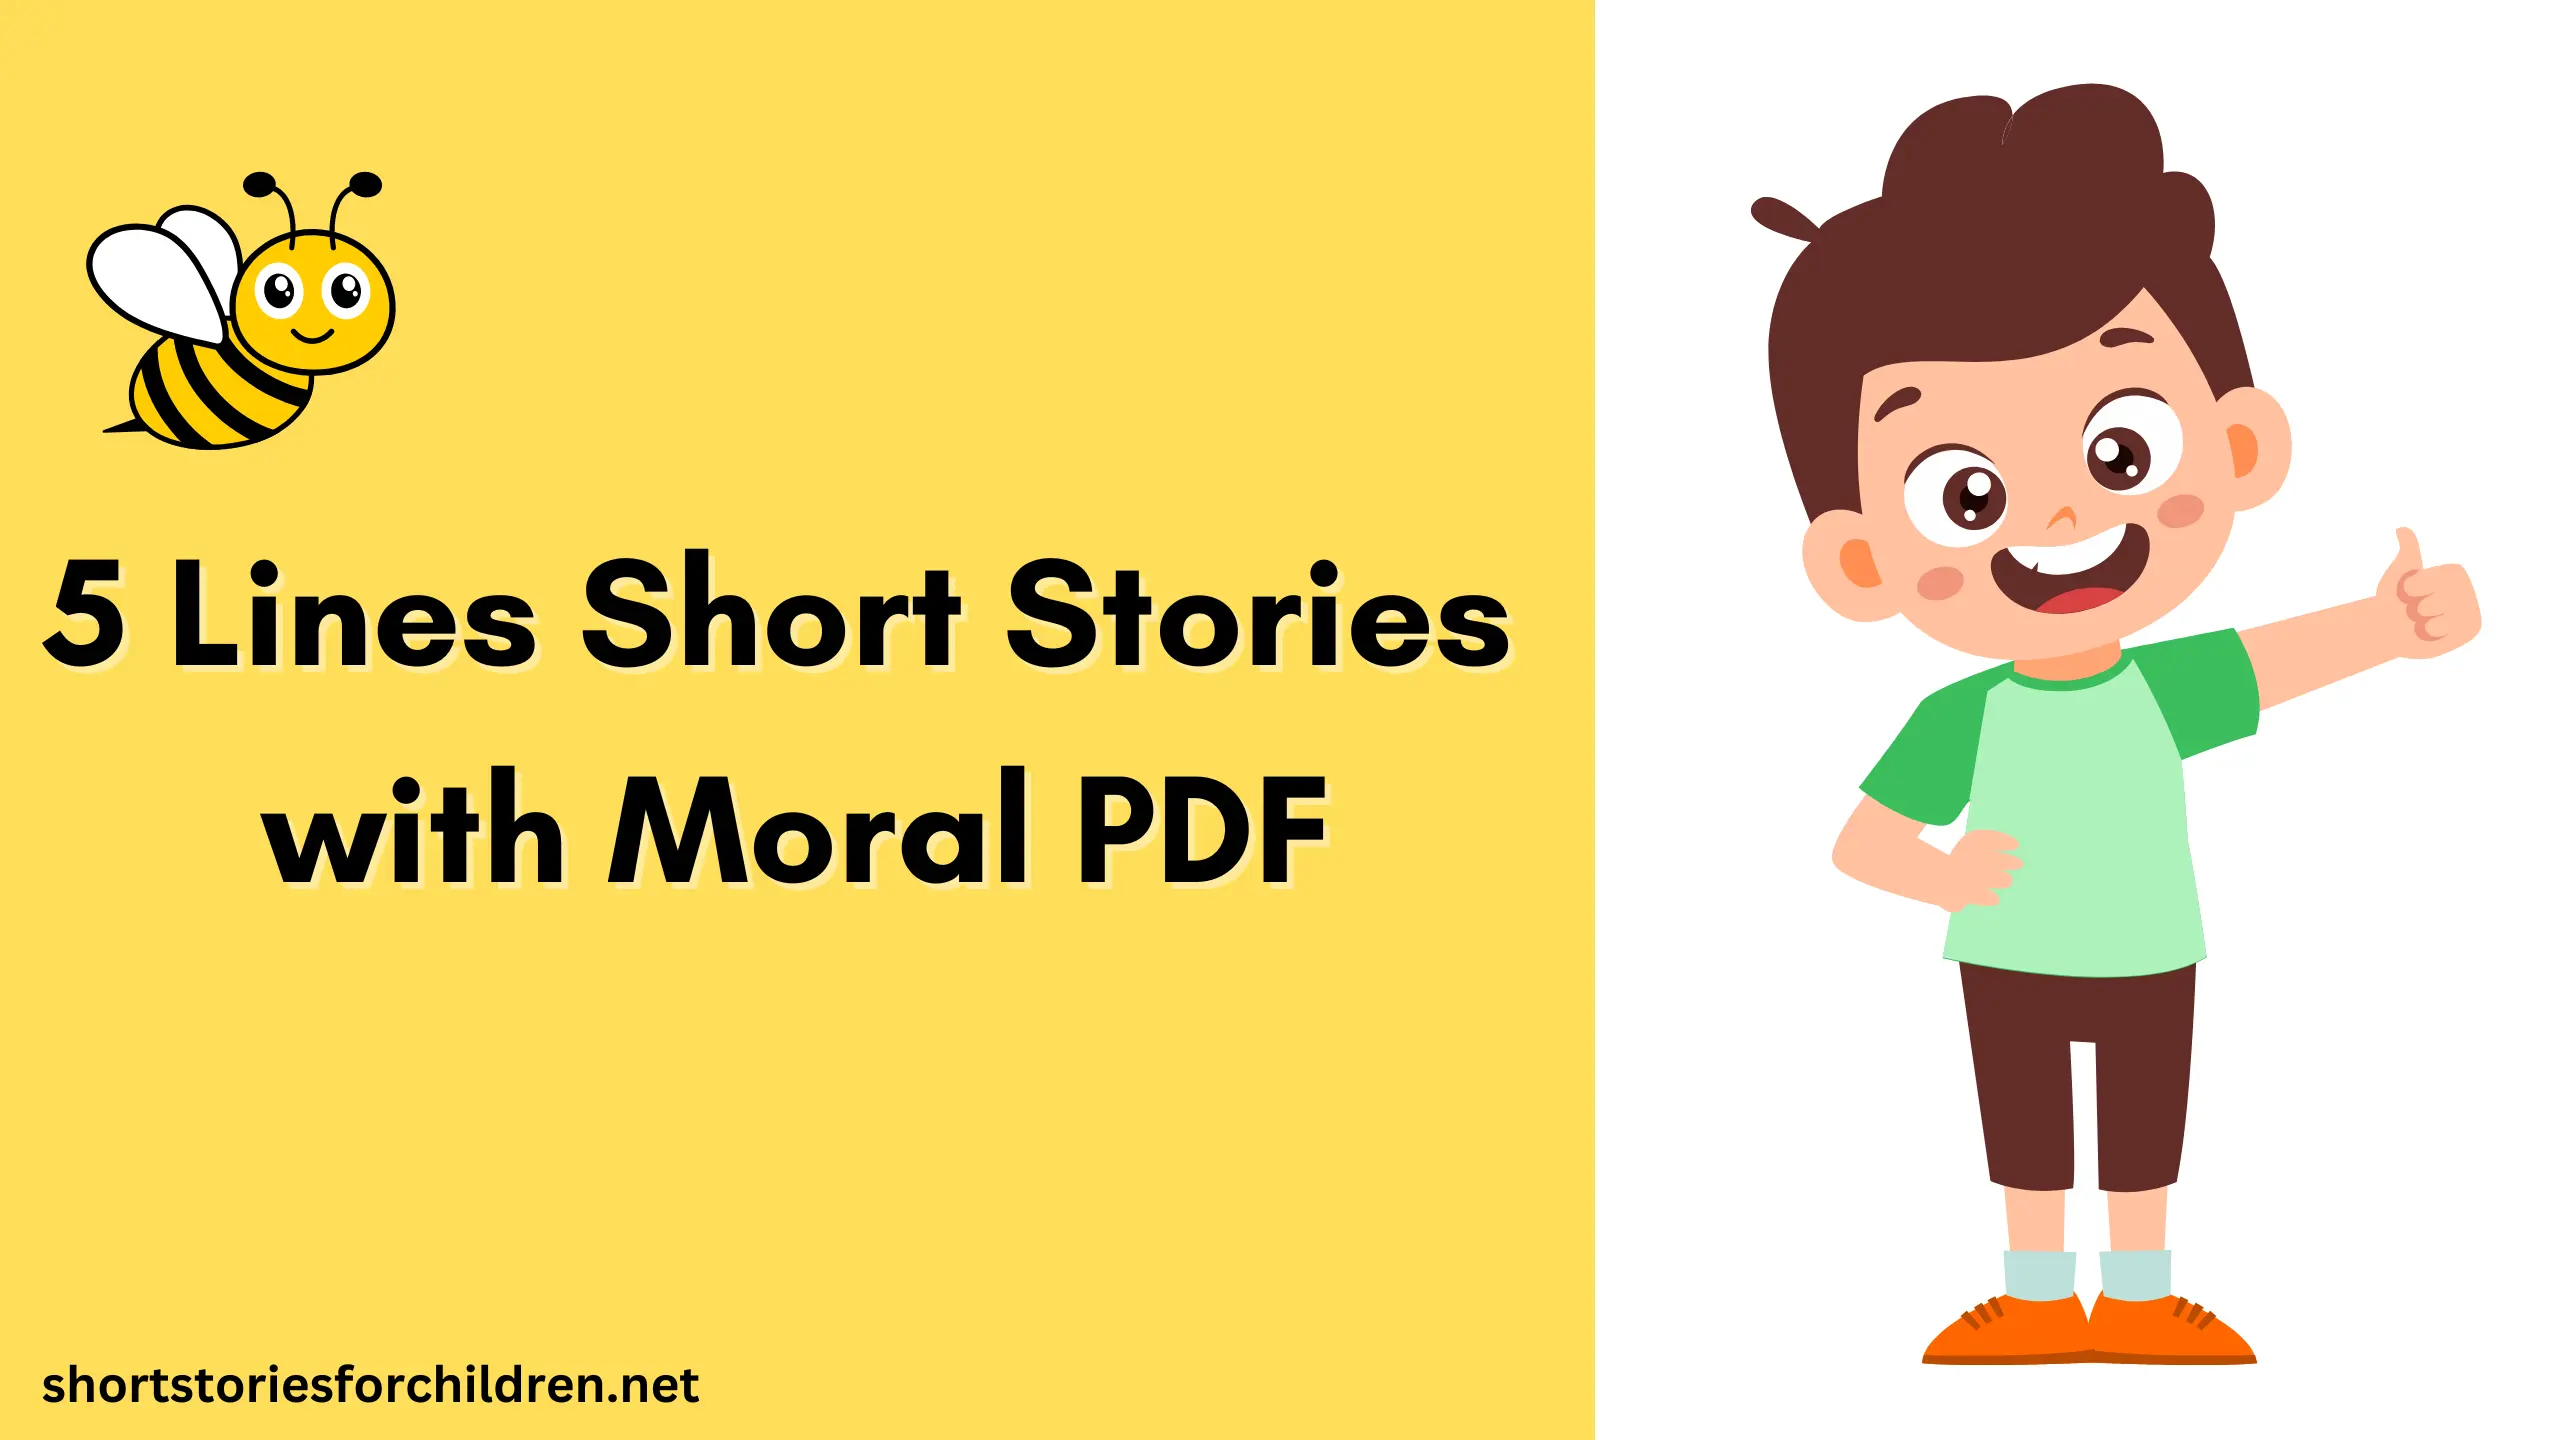 5 Lines Short Stories with Moral PDF